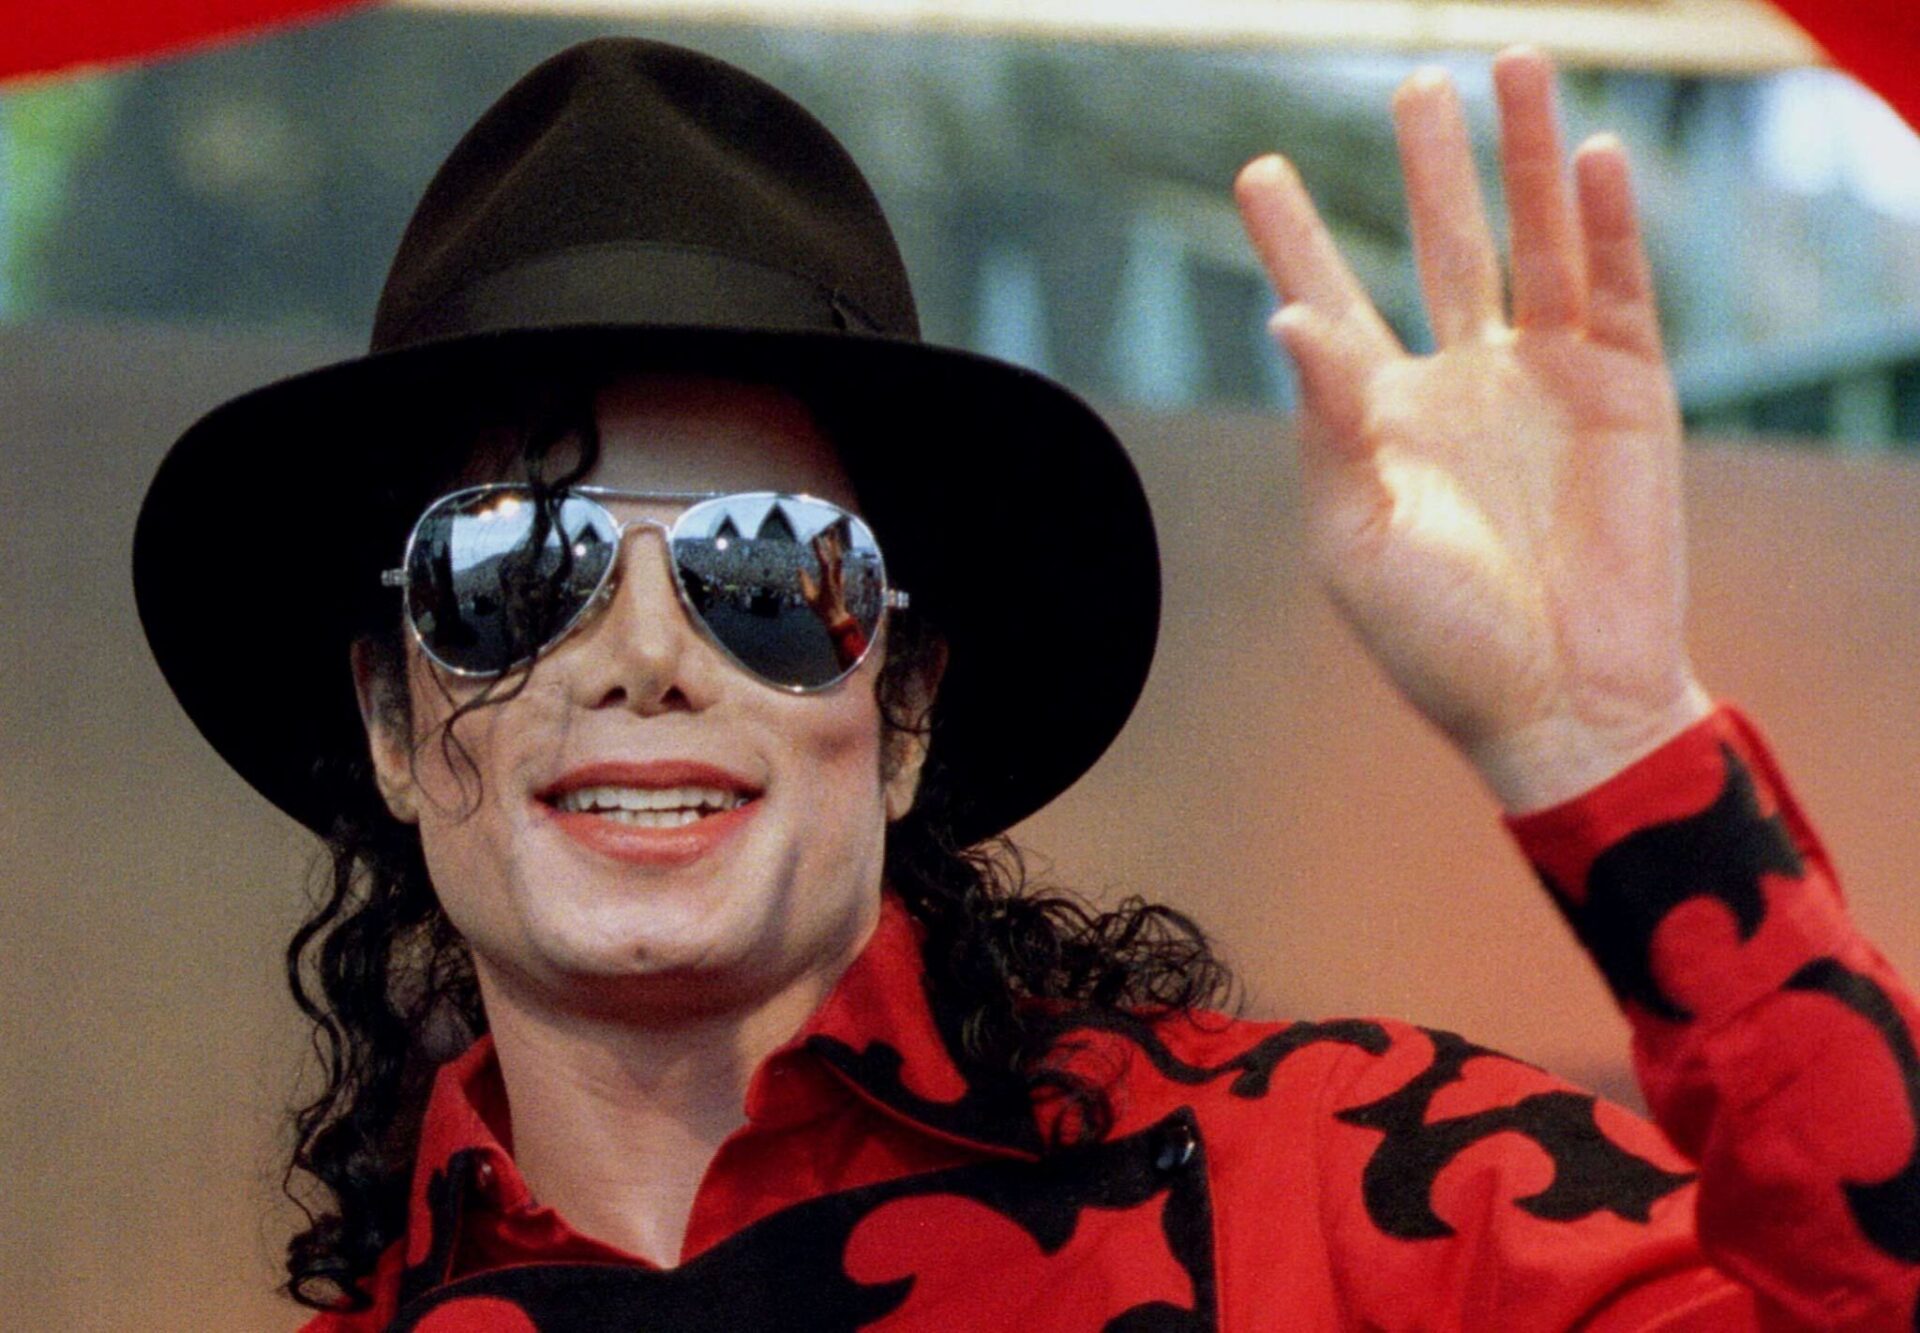 Michael Jackson Estate sells music to Sony in $750m deal